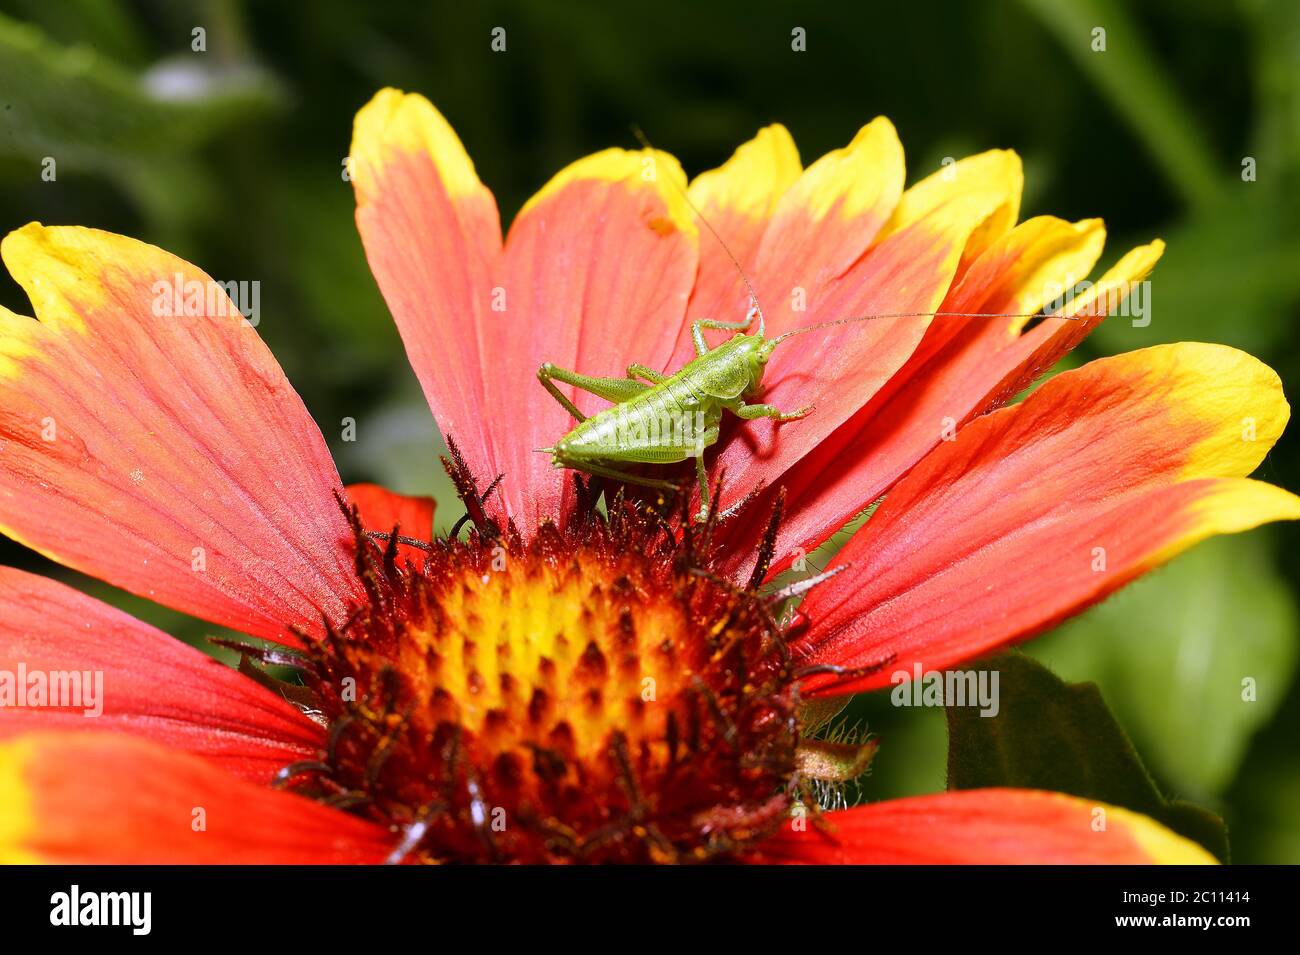 Red Helenium flower close-up with a grasshopper sitting on it Stock Photo